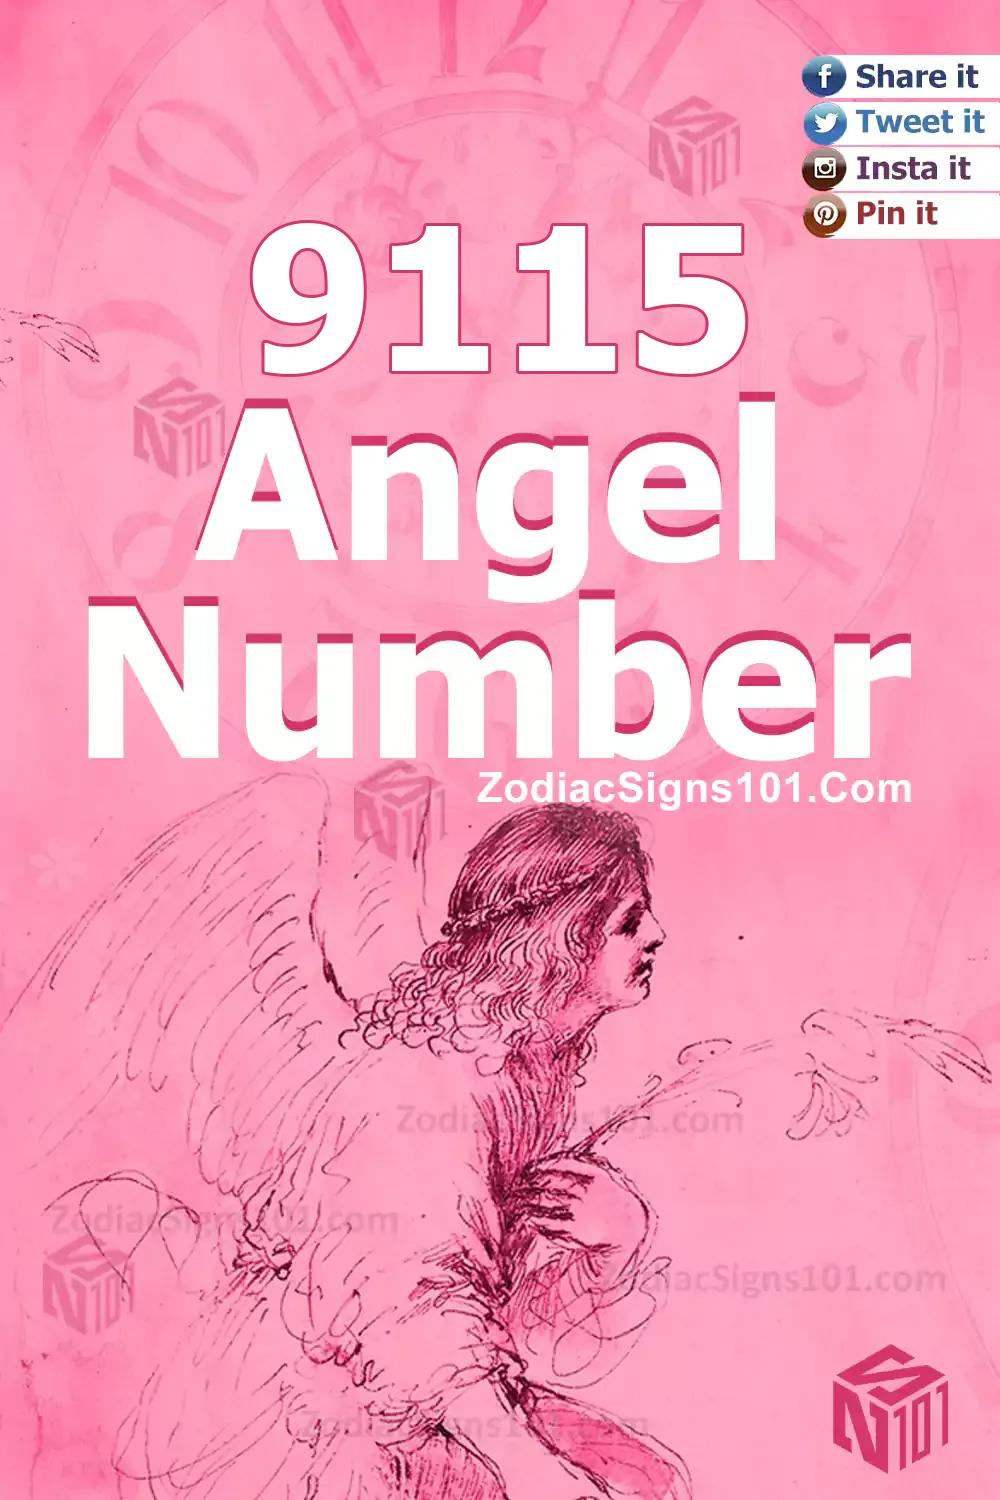 9115 Angel Number Meaning